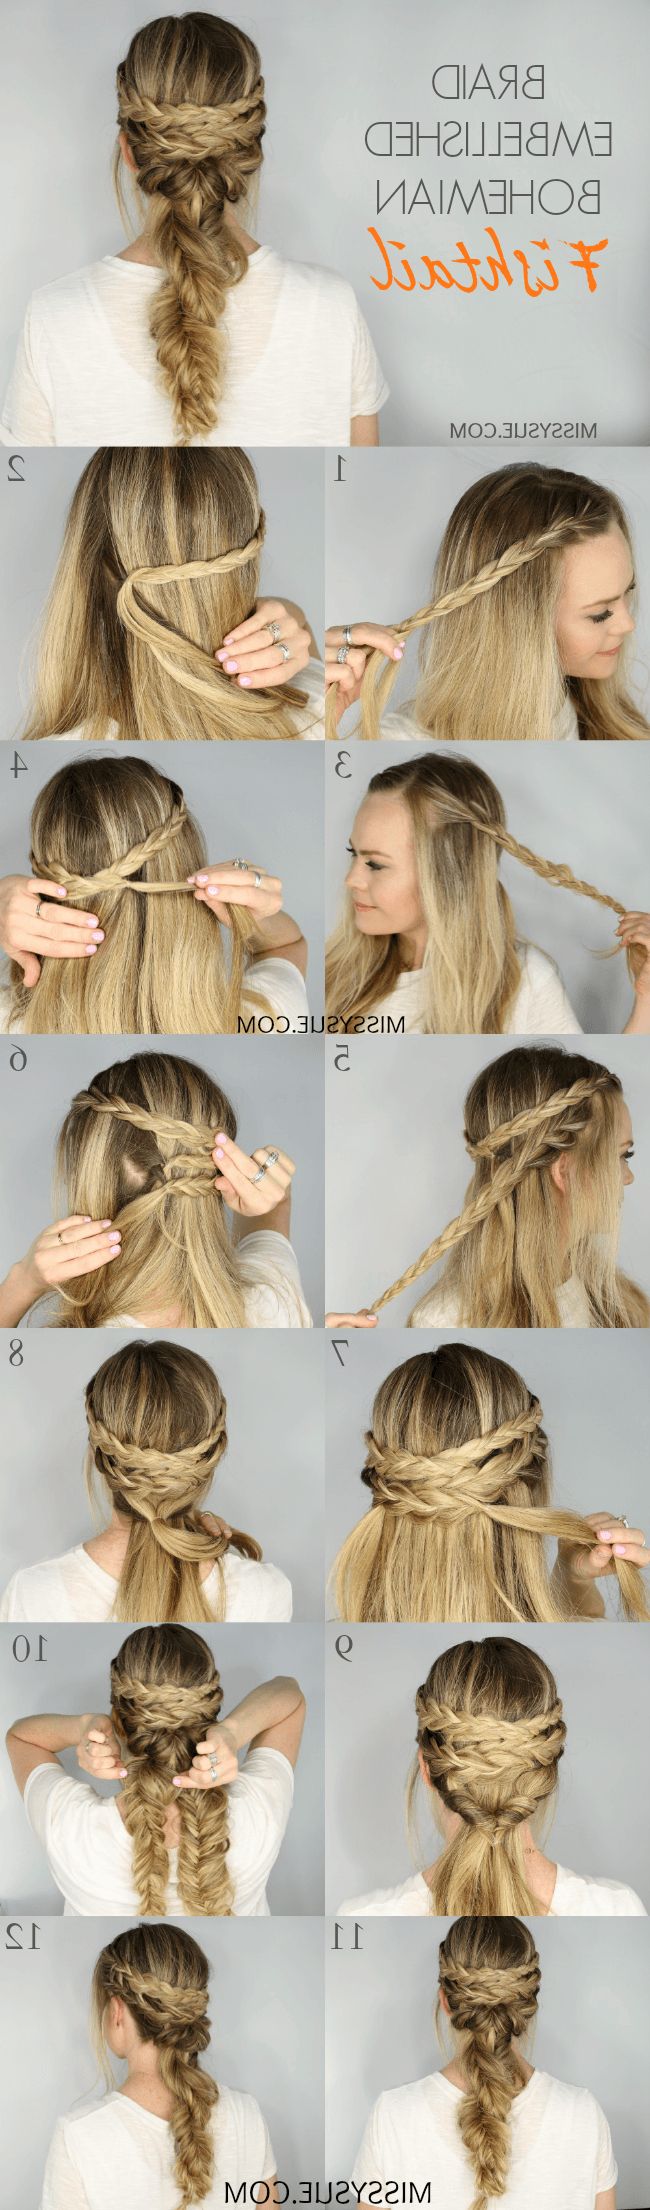 Braid Embellished Bohemian Fishtail Throughout Boho Updo With Fishtail Braids (View 5 of 25)